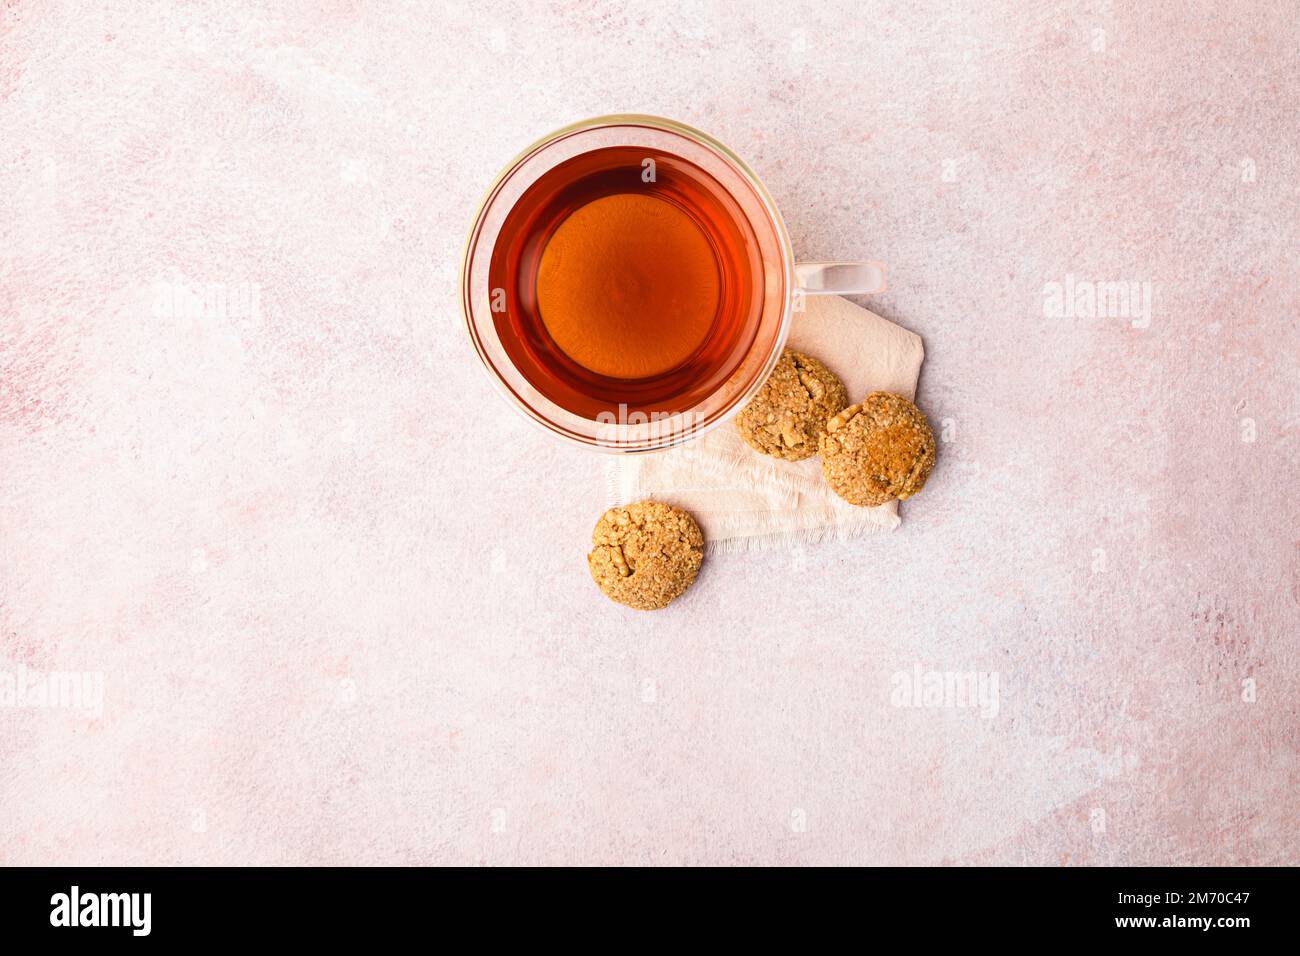 Cup of black tea with homemade oats and walnut cookies. Stock Photo